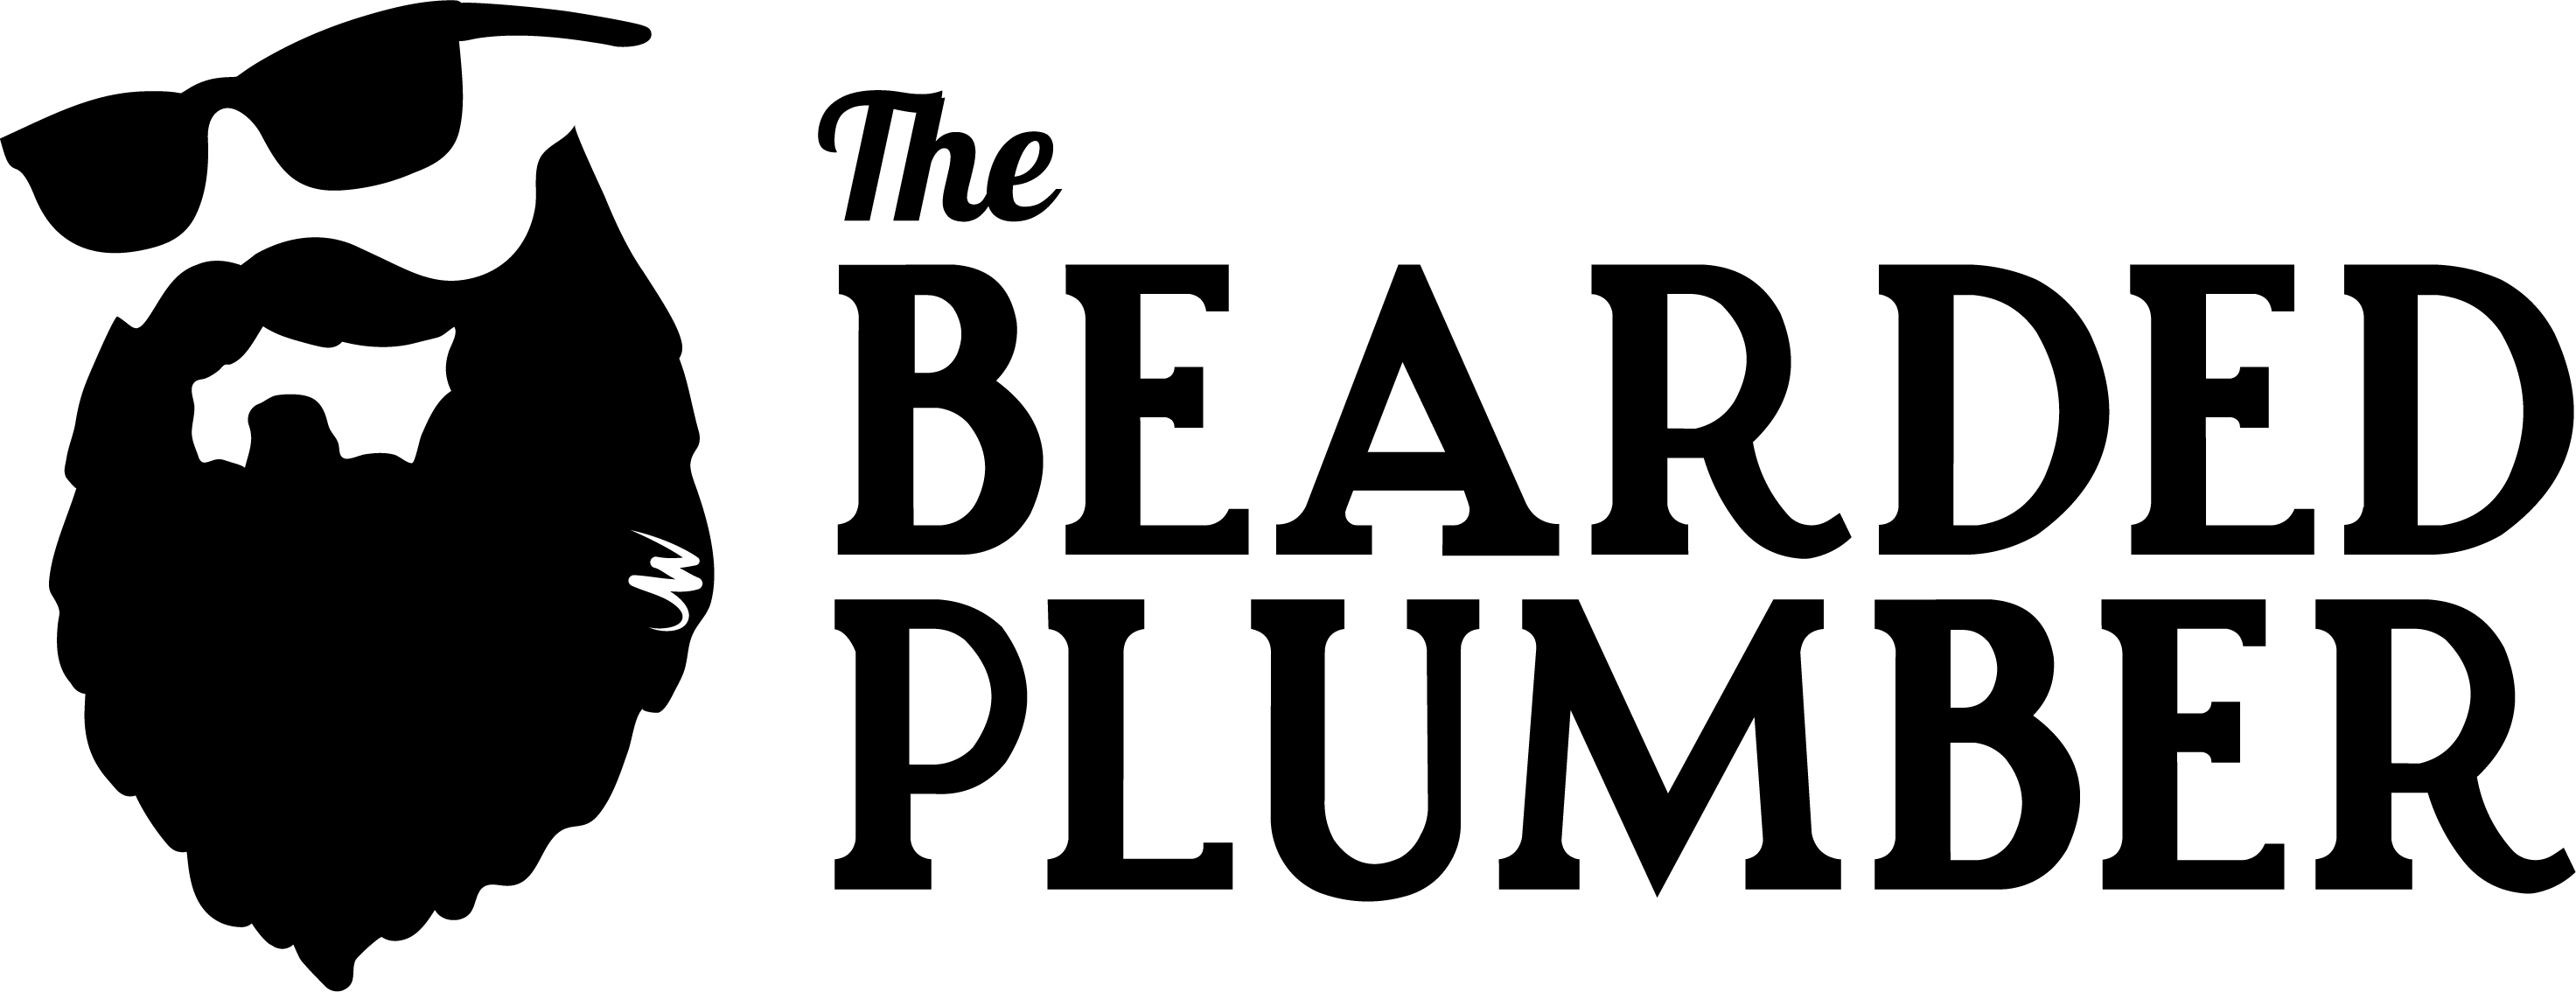 The bearded plumber logo by Great Big Graphics